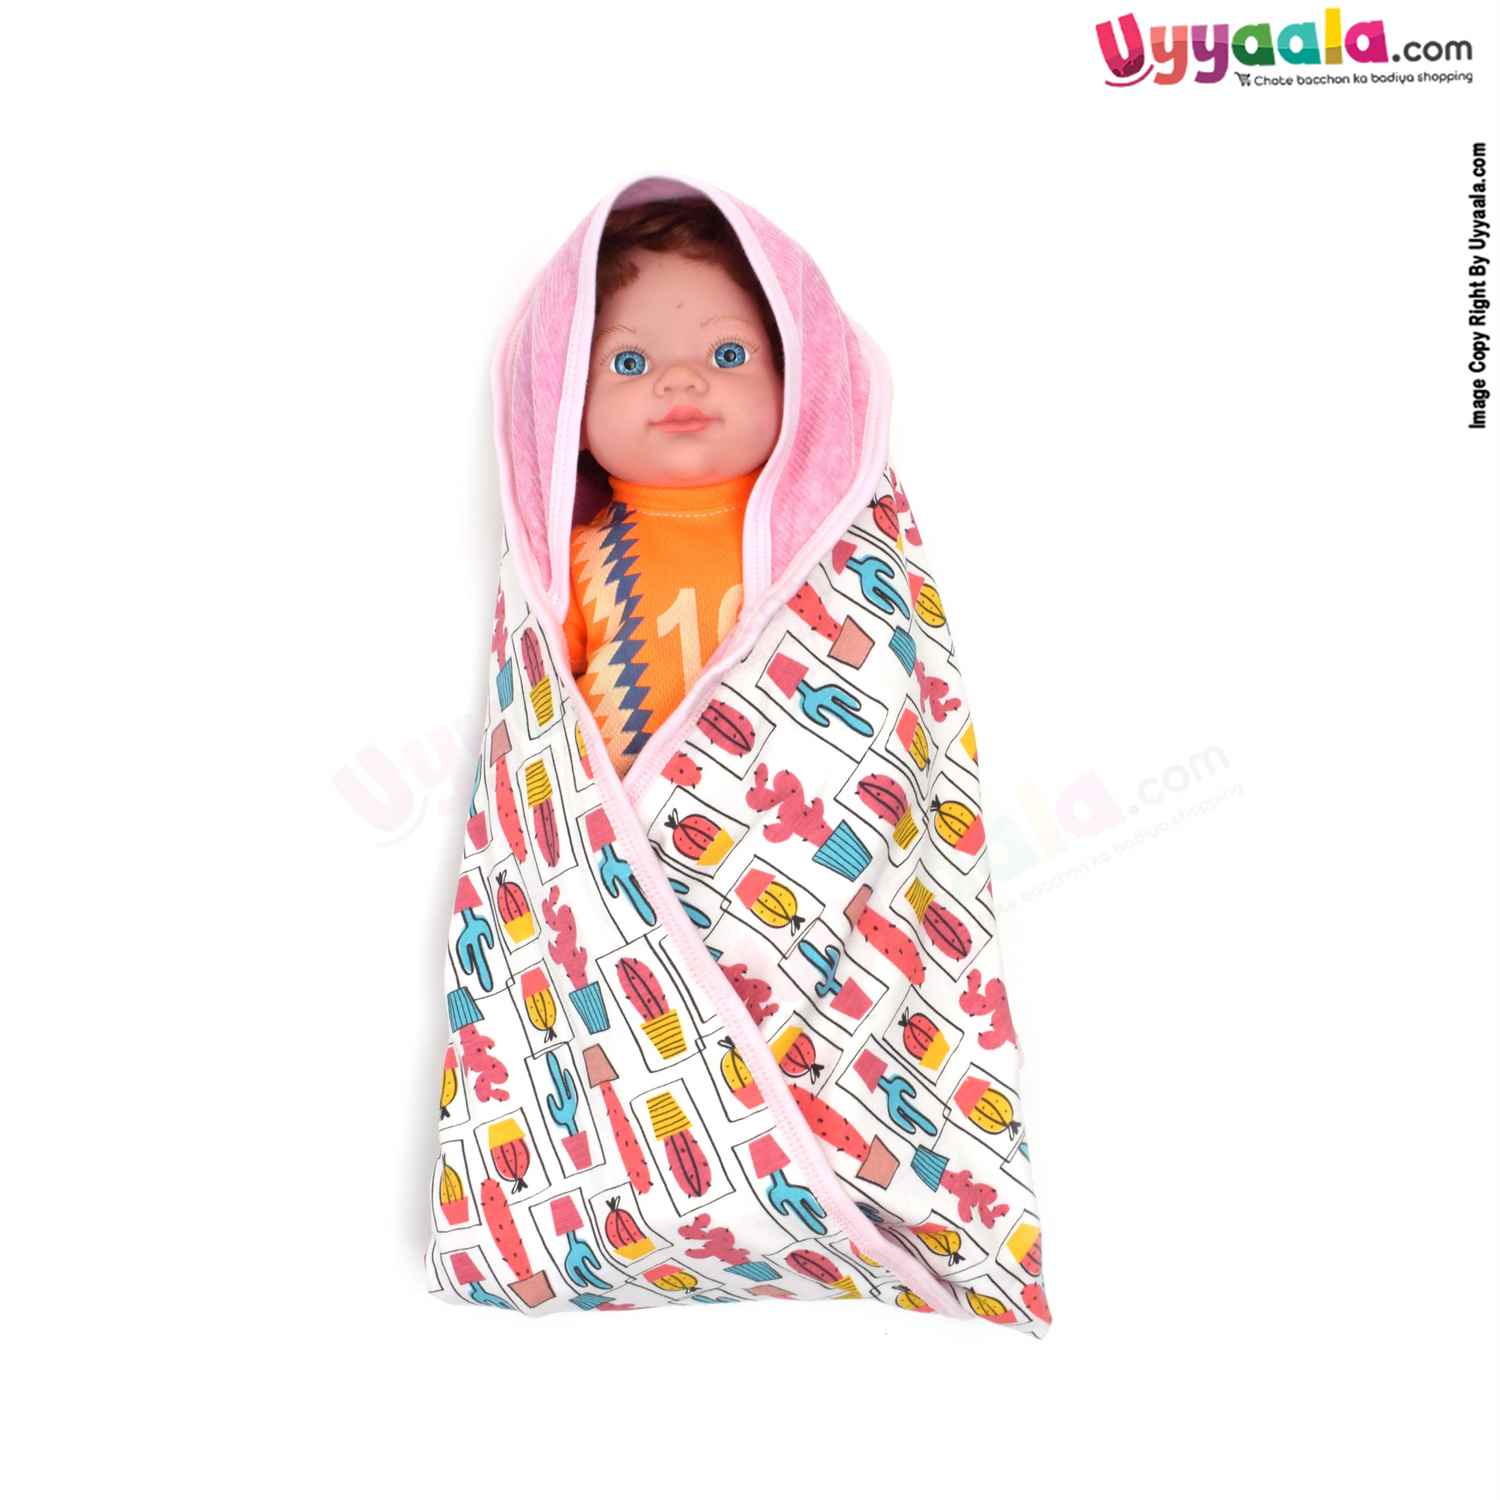 Baby Hooded Towel Premium Double Layered,100% Cotton Hosiery One Side & Another Side Fur with Floral & Cactus Plant Print 0+m Age , Size (94*65cm)